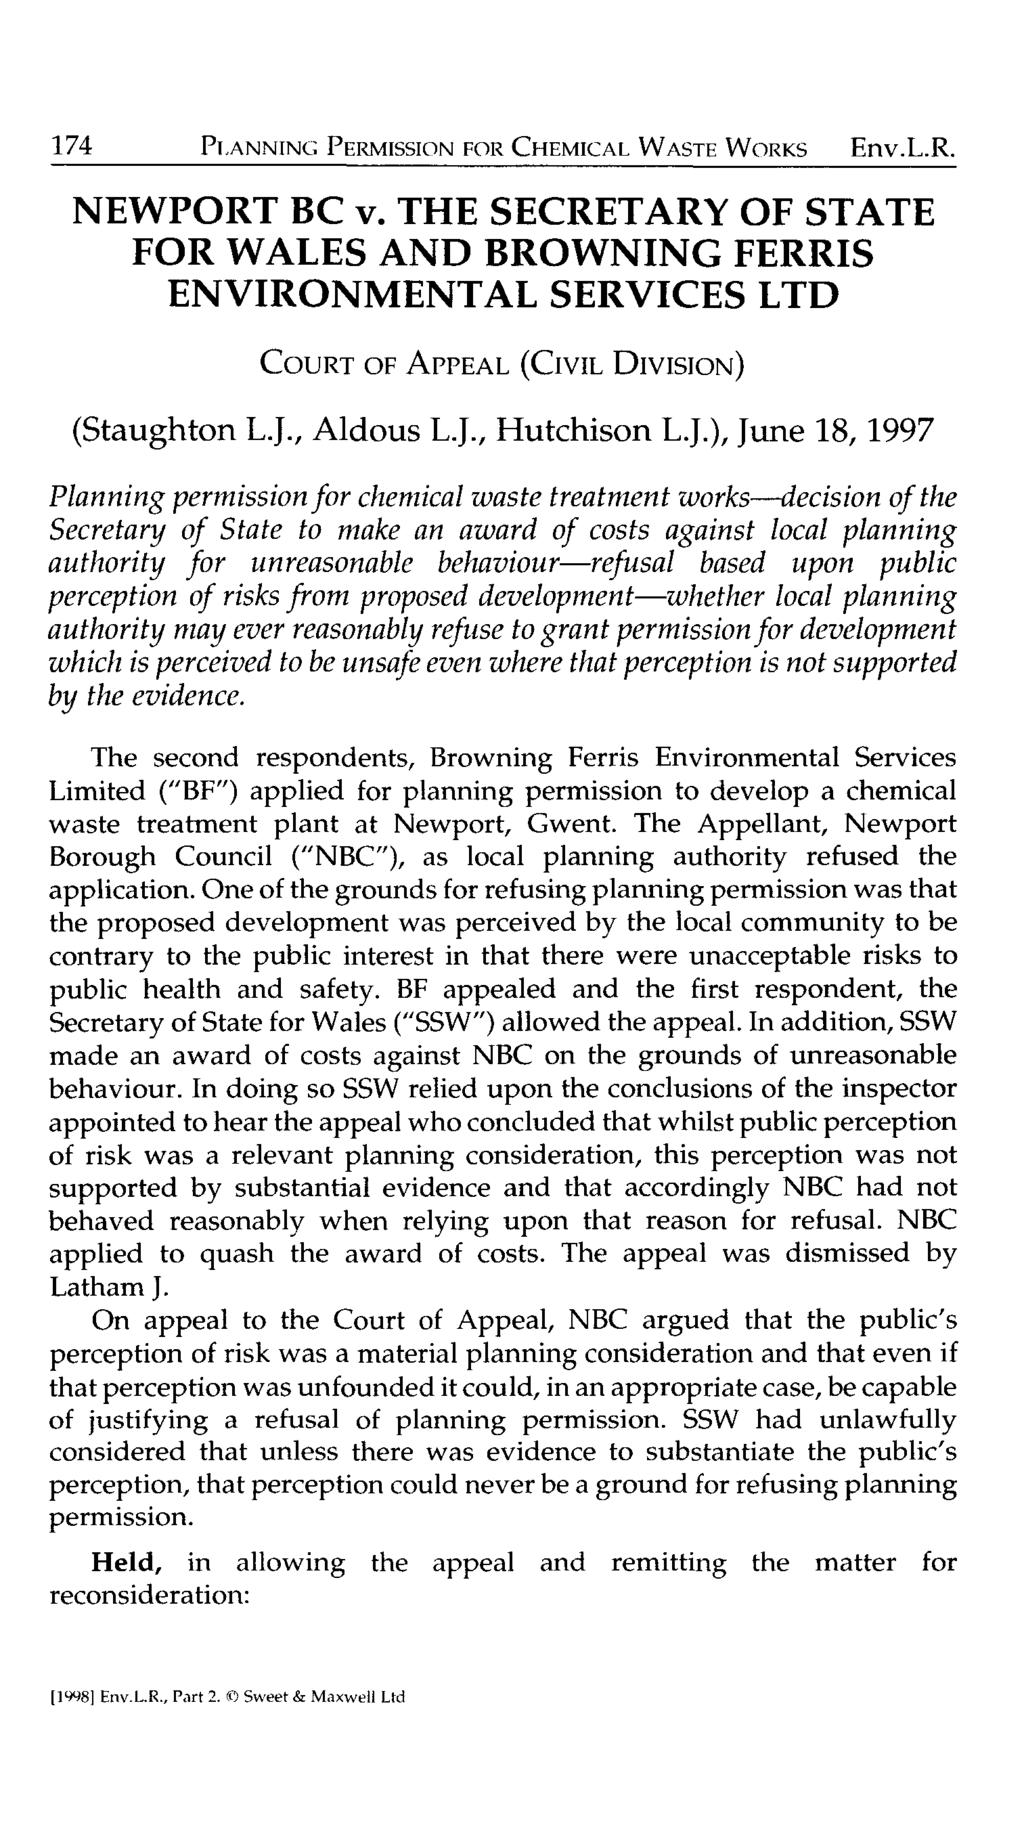 174 PLANNING PERMISSION FOR CHEMICAL WASTE WORKS Env.L.R. NEWPORT BC v. THE SECRETARY OF STATE FOR WALES AND BROWNING FERRIS ENVIRONMENTAL SERVICES LTD COURT OF ApPEAL (CIVIL DIVISION) (Staughton L.J.